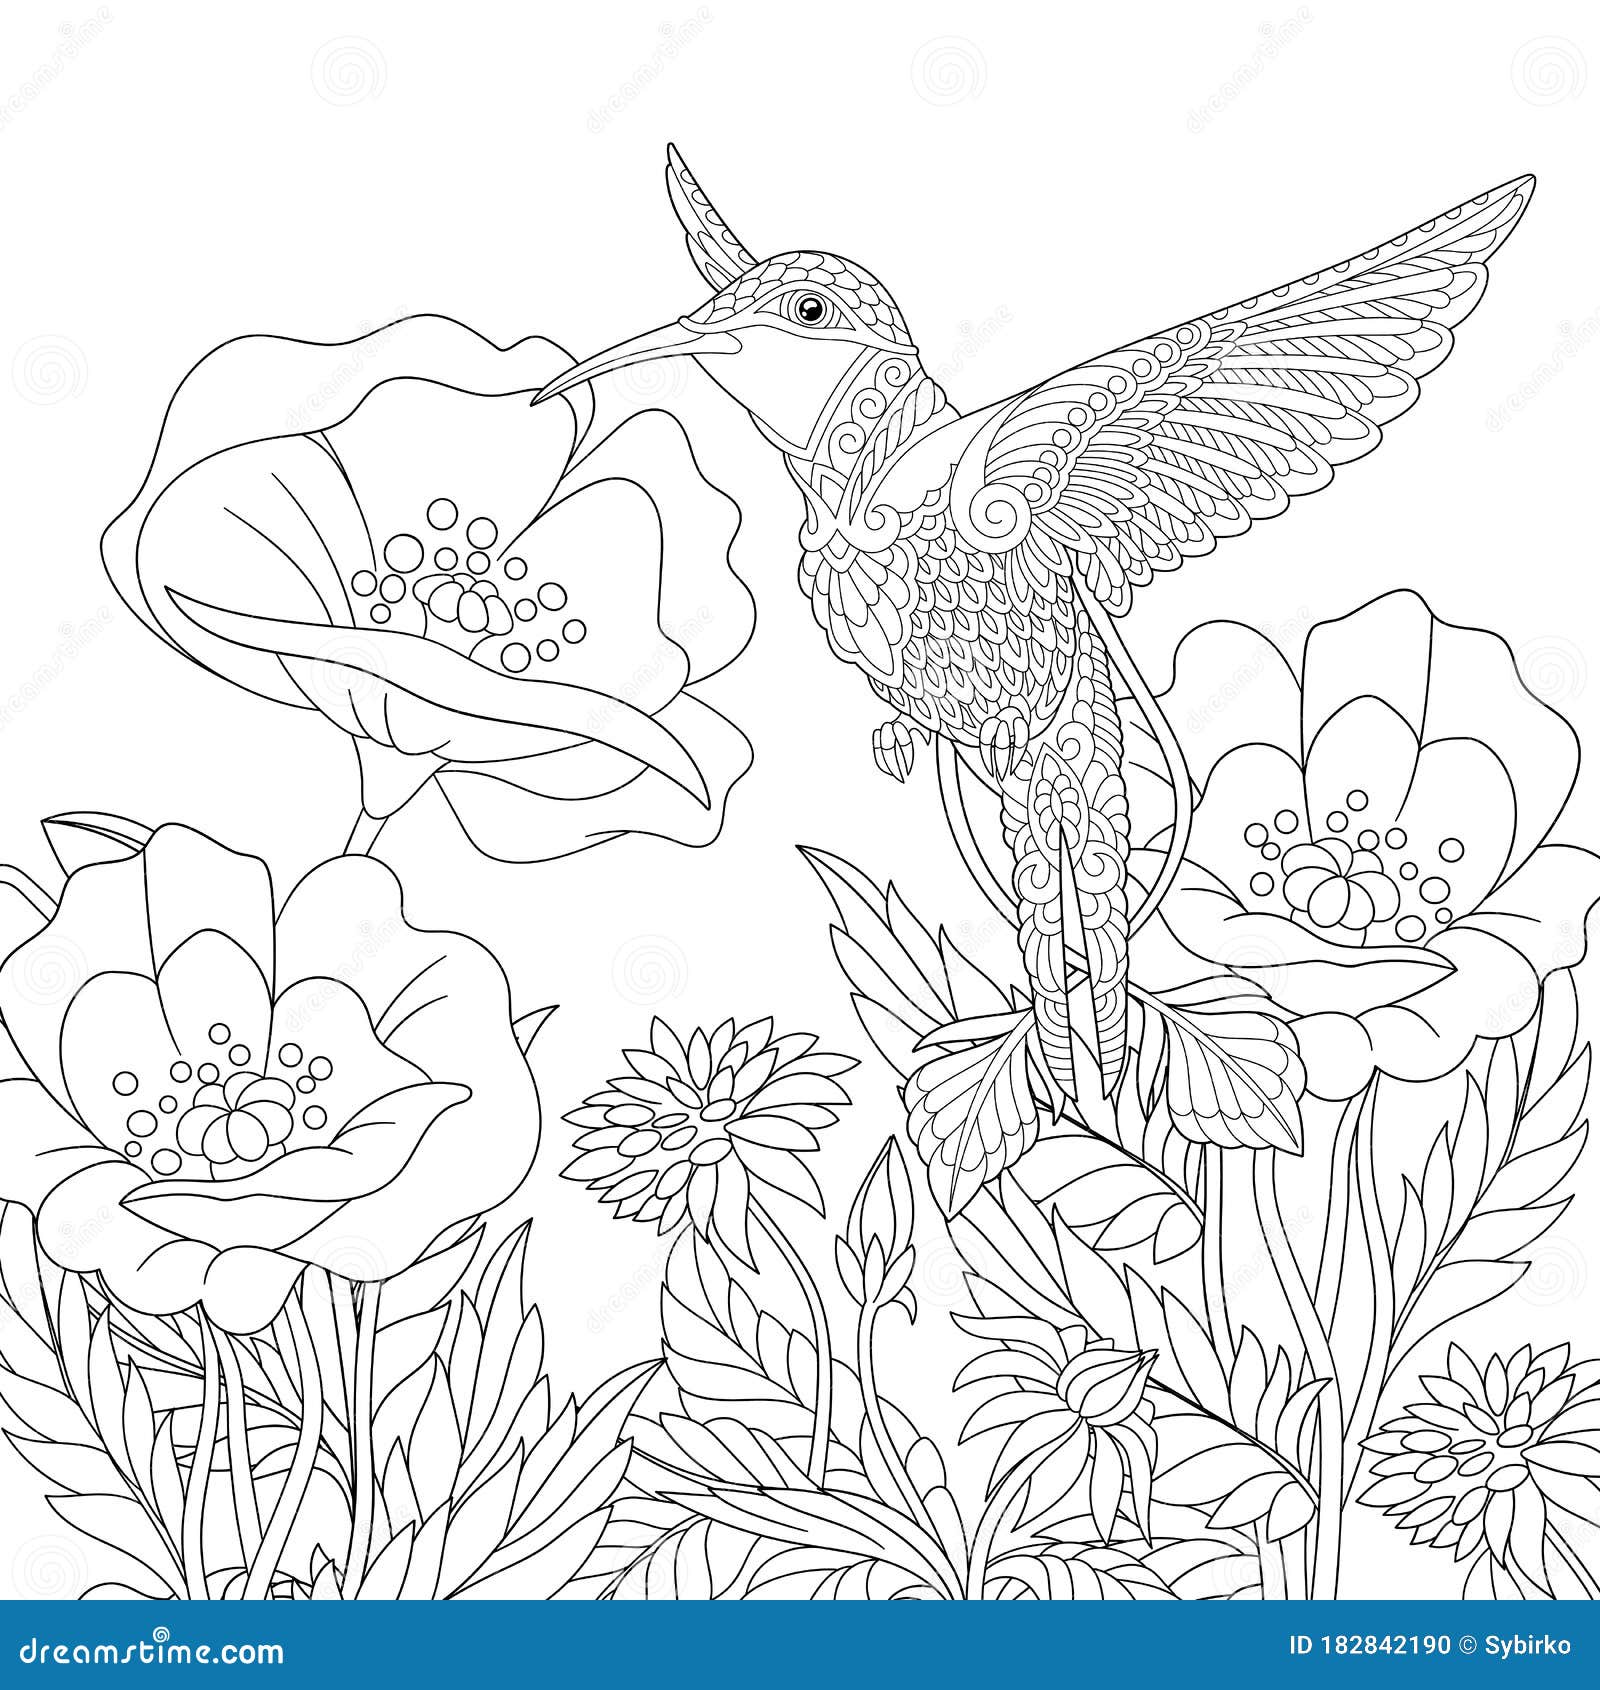 Coloring Page with Hummingbird and Poppy Flowers Stock Vector ...